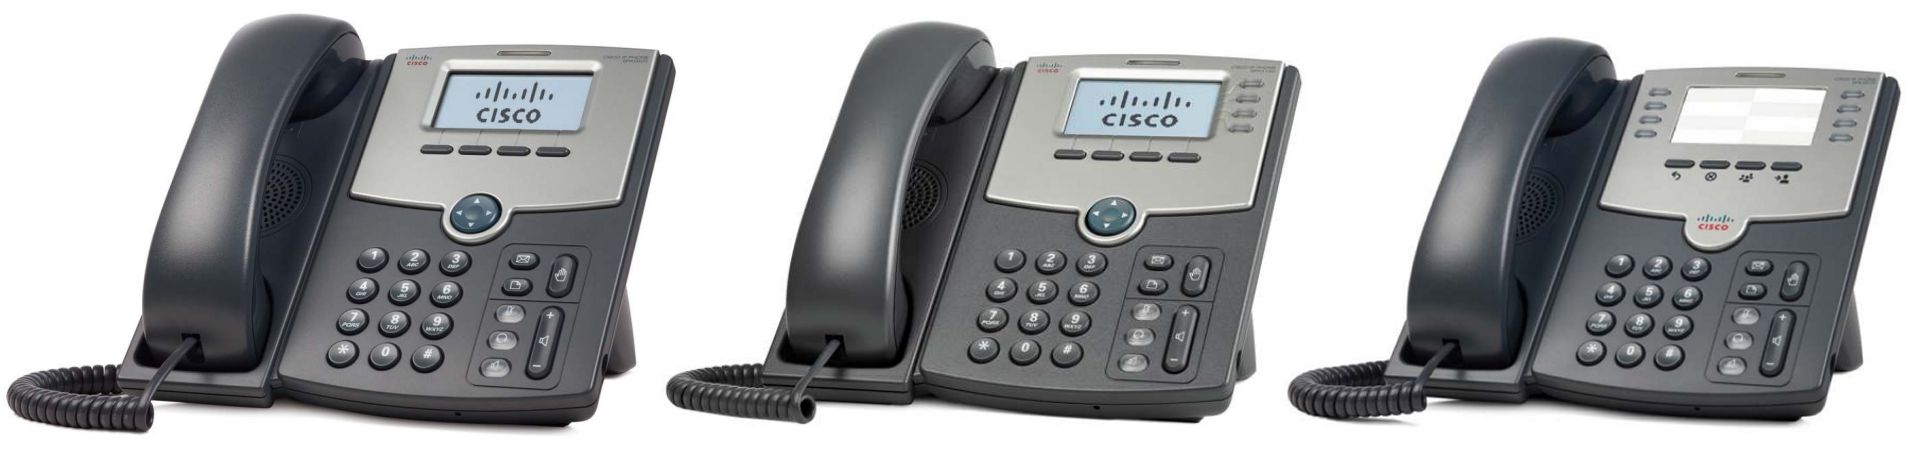 Cisco SPA508G 8-Line IP VoIP Office Telephone Phone PoE w/ Handset 6MthWtyTaxIn 